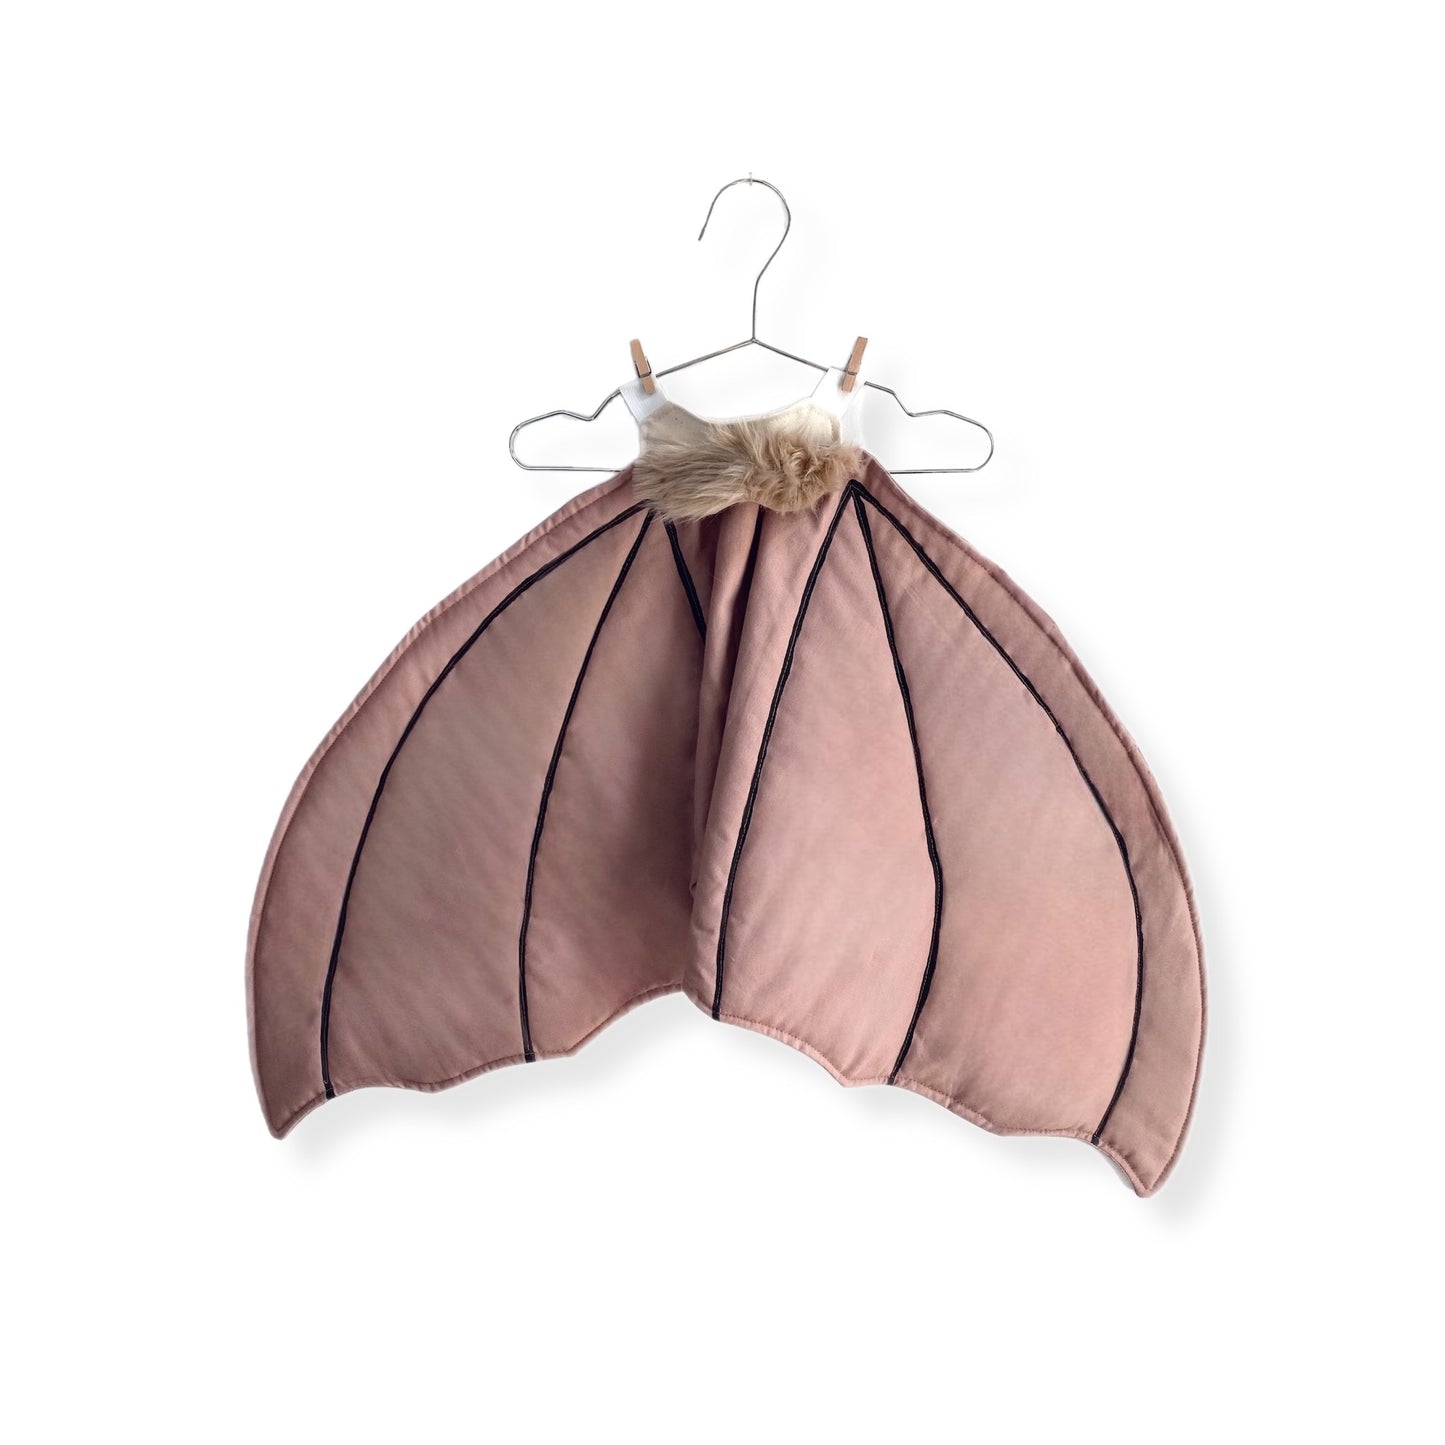 Furry brown bat costume wings with fur for kids.